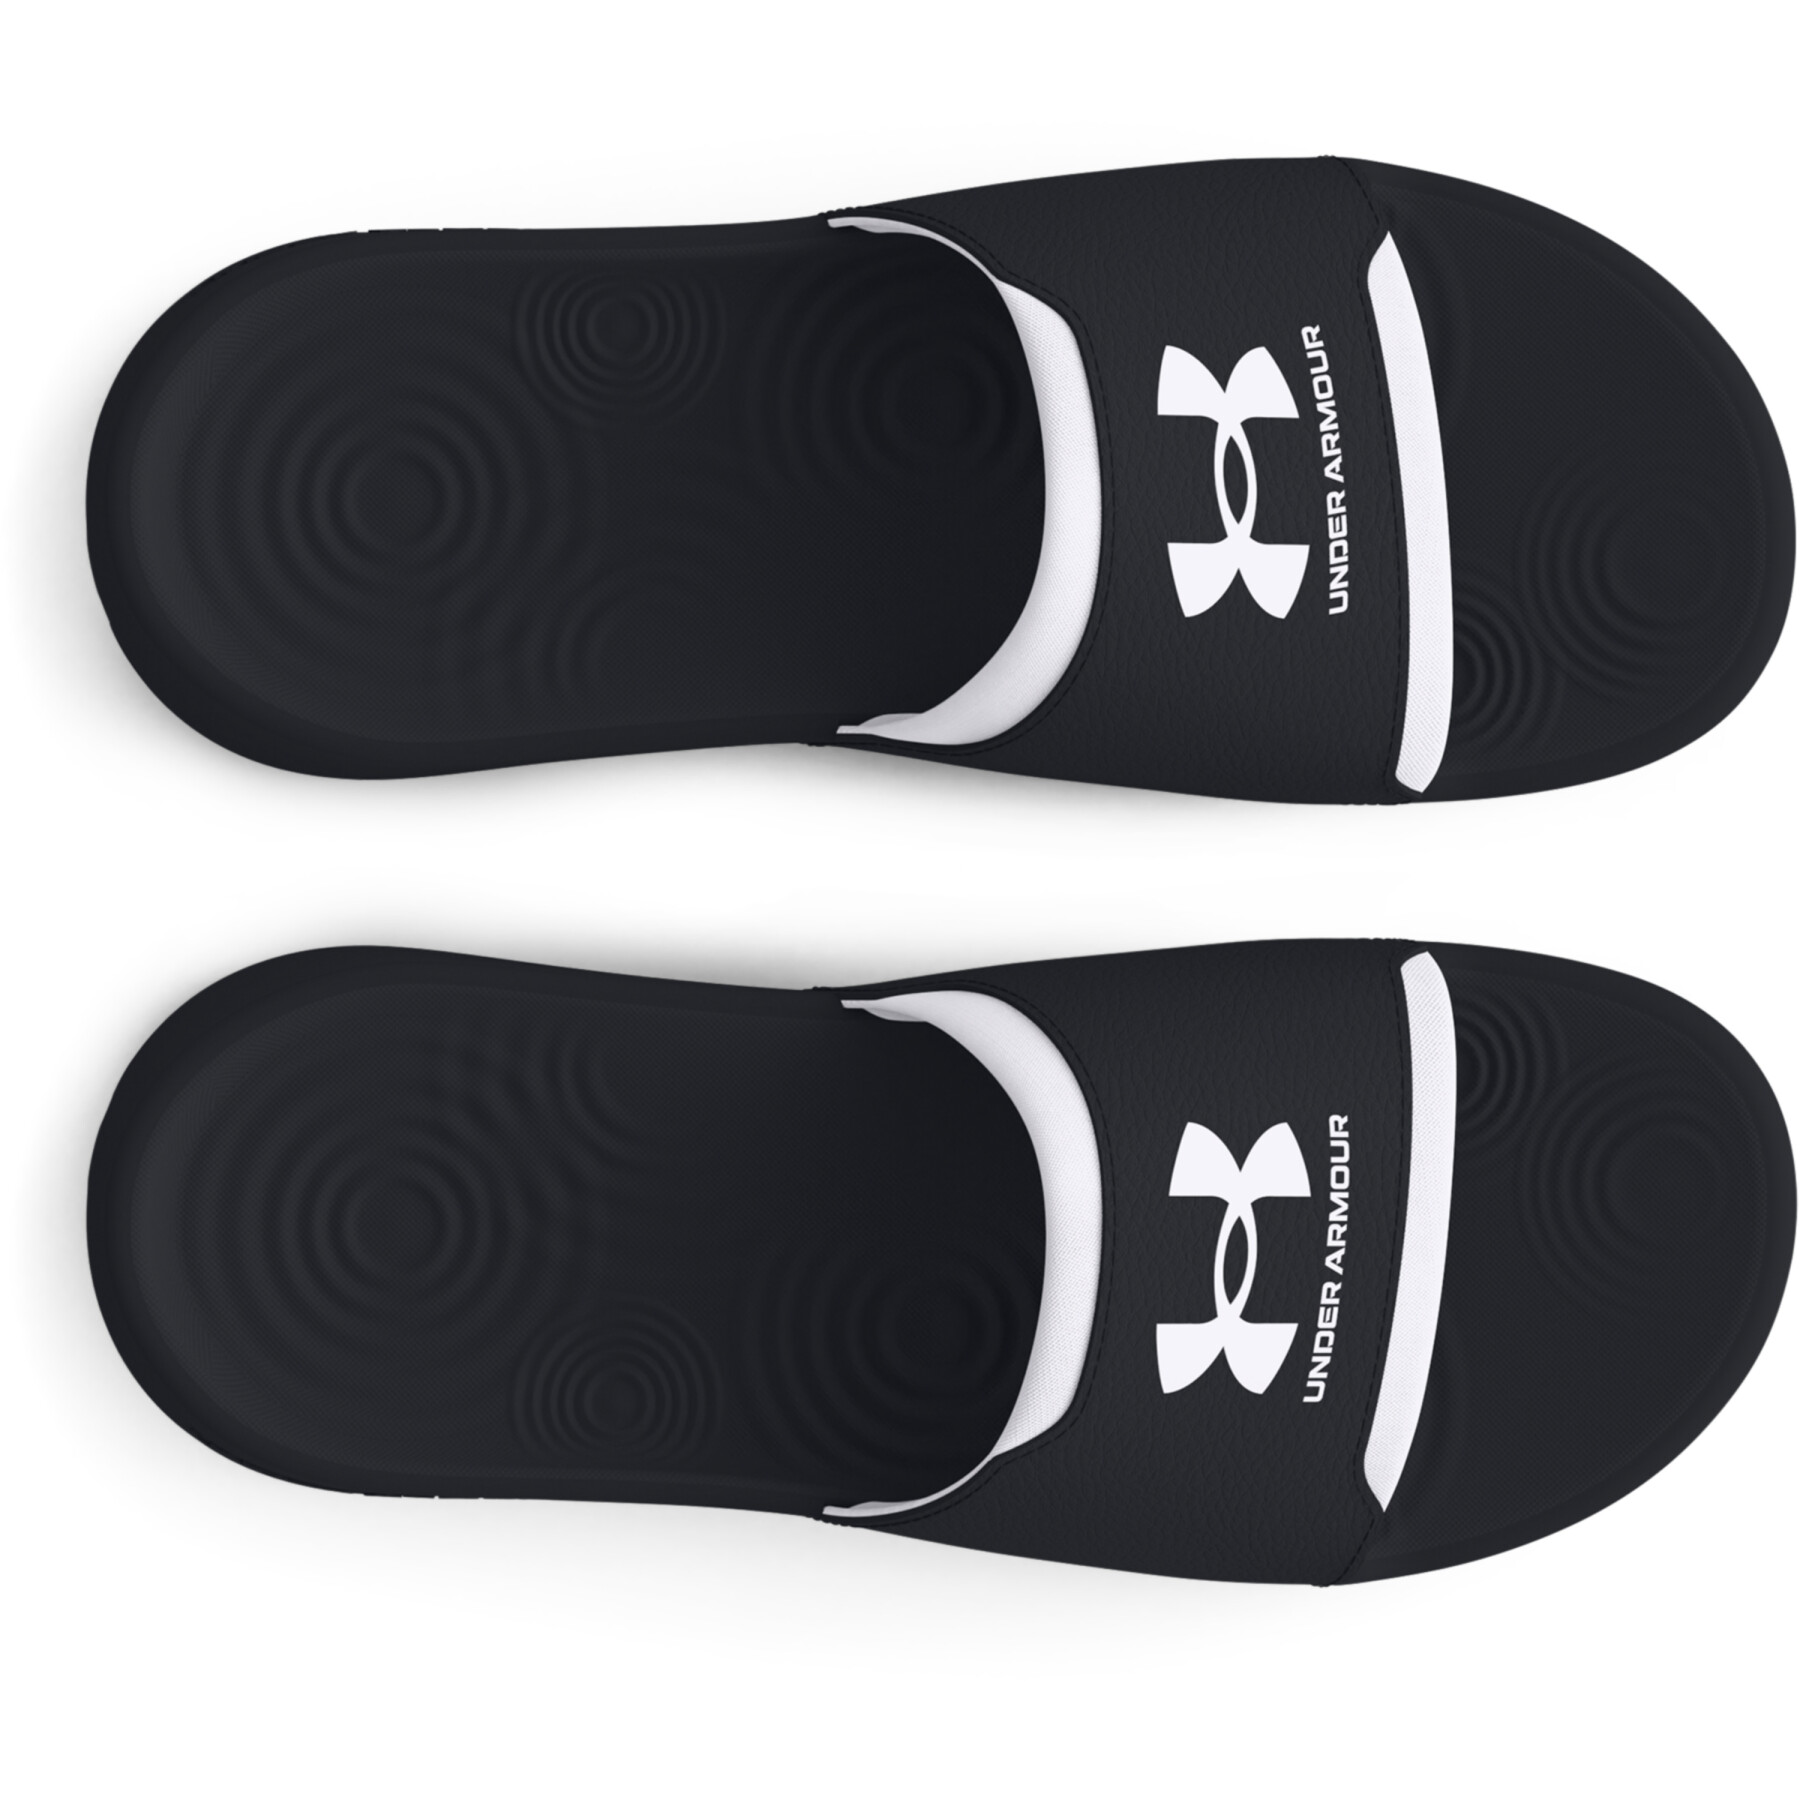 Slides Under Armour Ignite Select